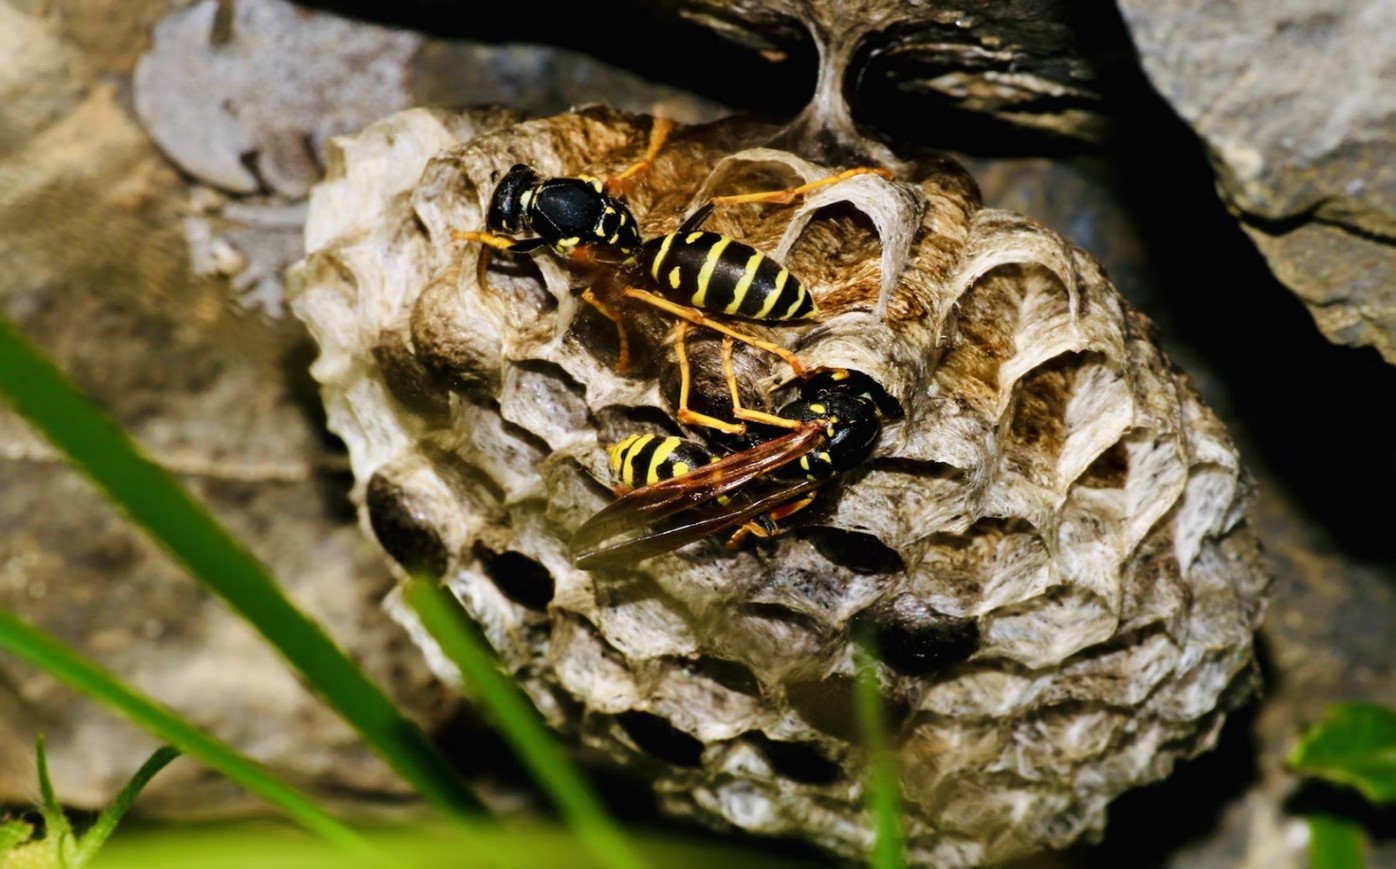 How to Get Rid of a Wasps Nest Safely